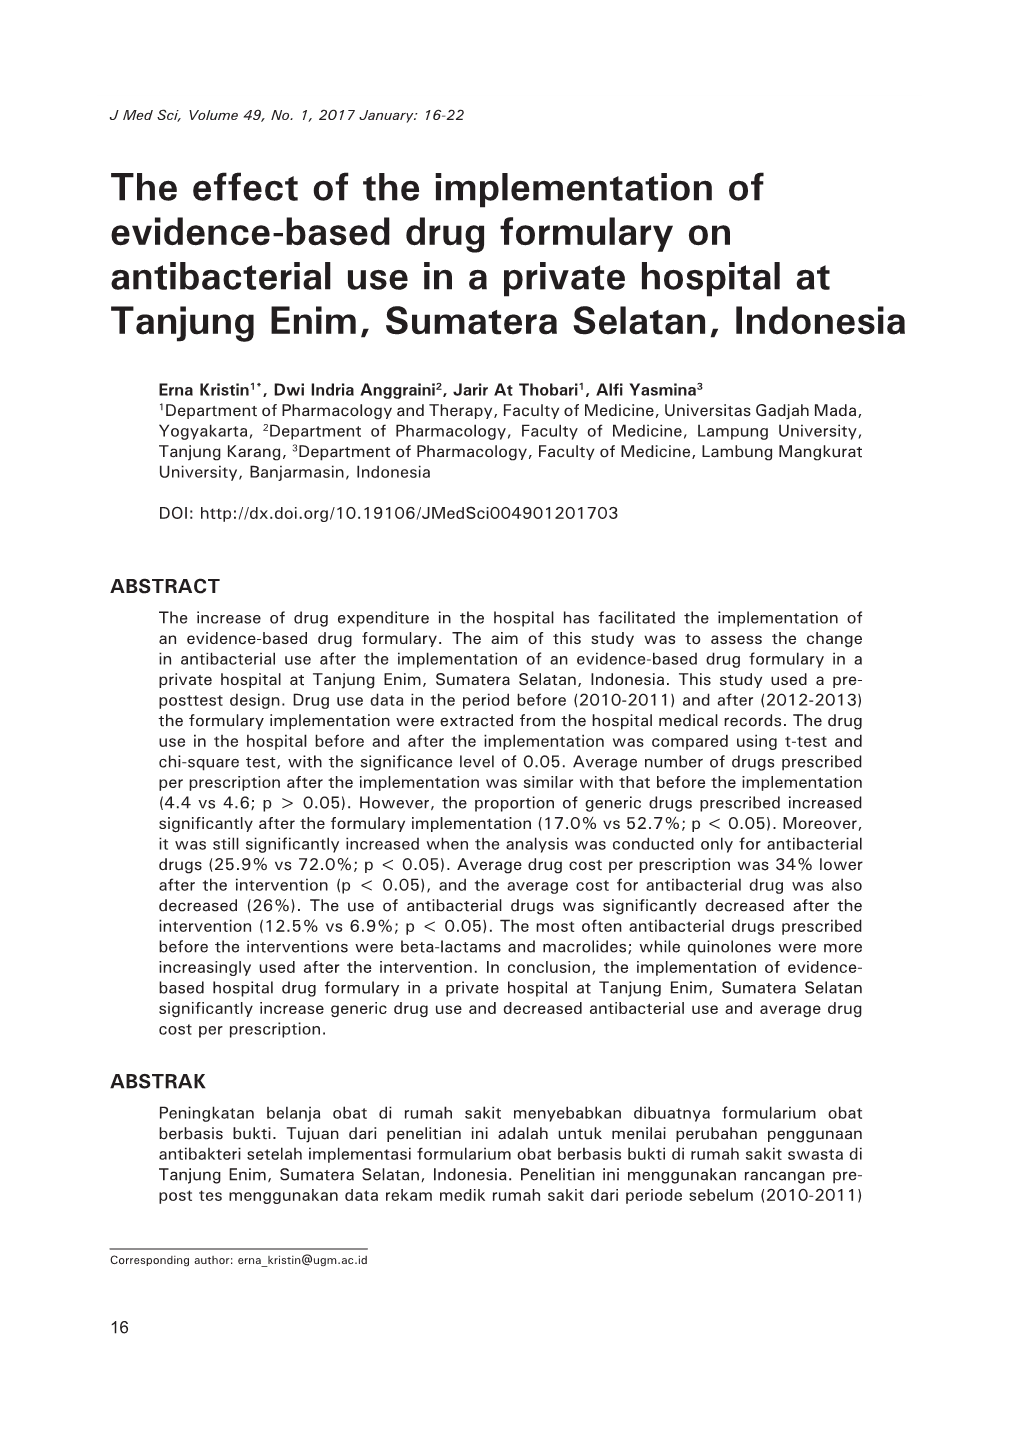 The Effect of the Implementation of Evidence-Based Drug Formulary on Antibacterial Use in a Private Hospital at Tanjung Enim, Sumatera Selatan, Indonesia